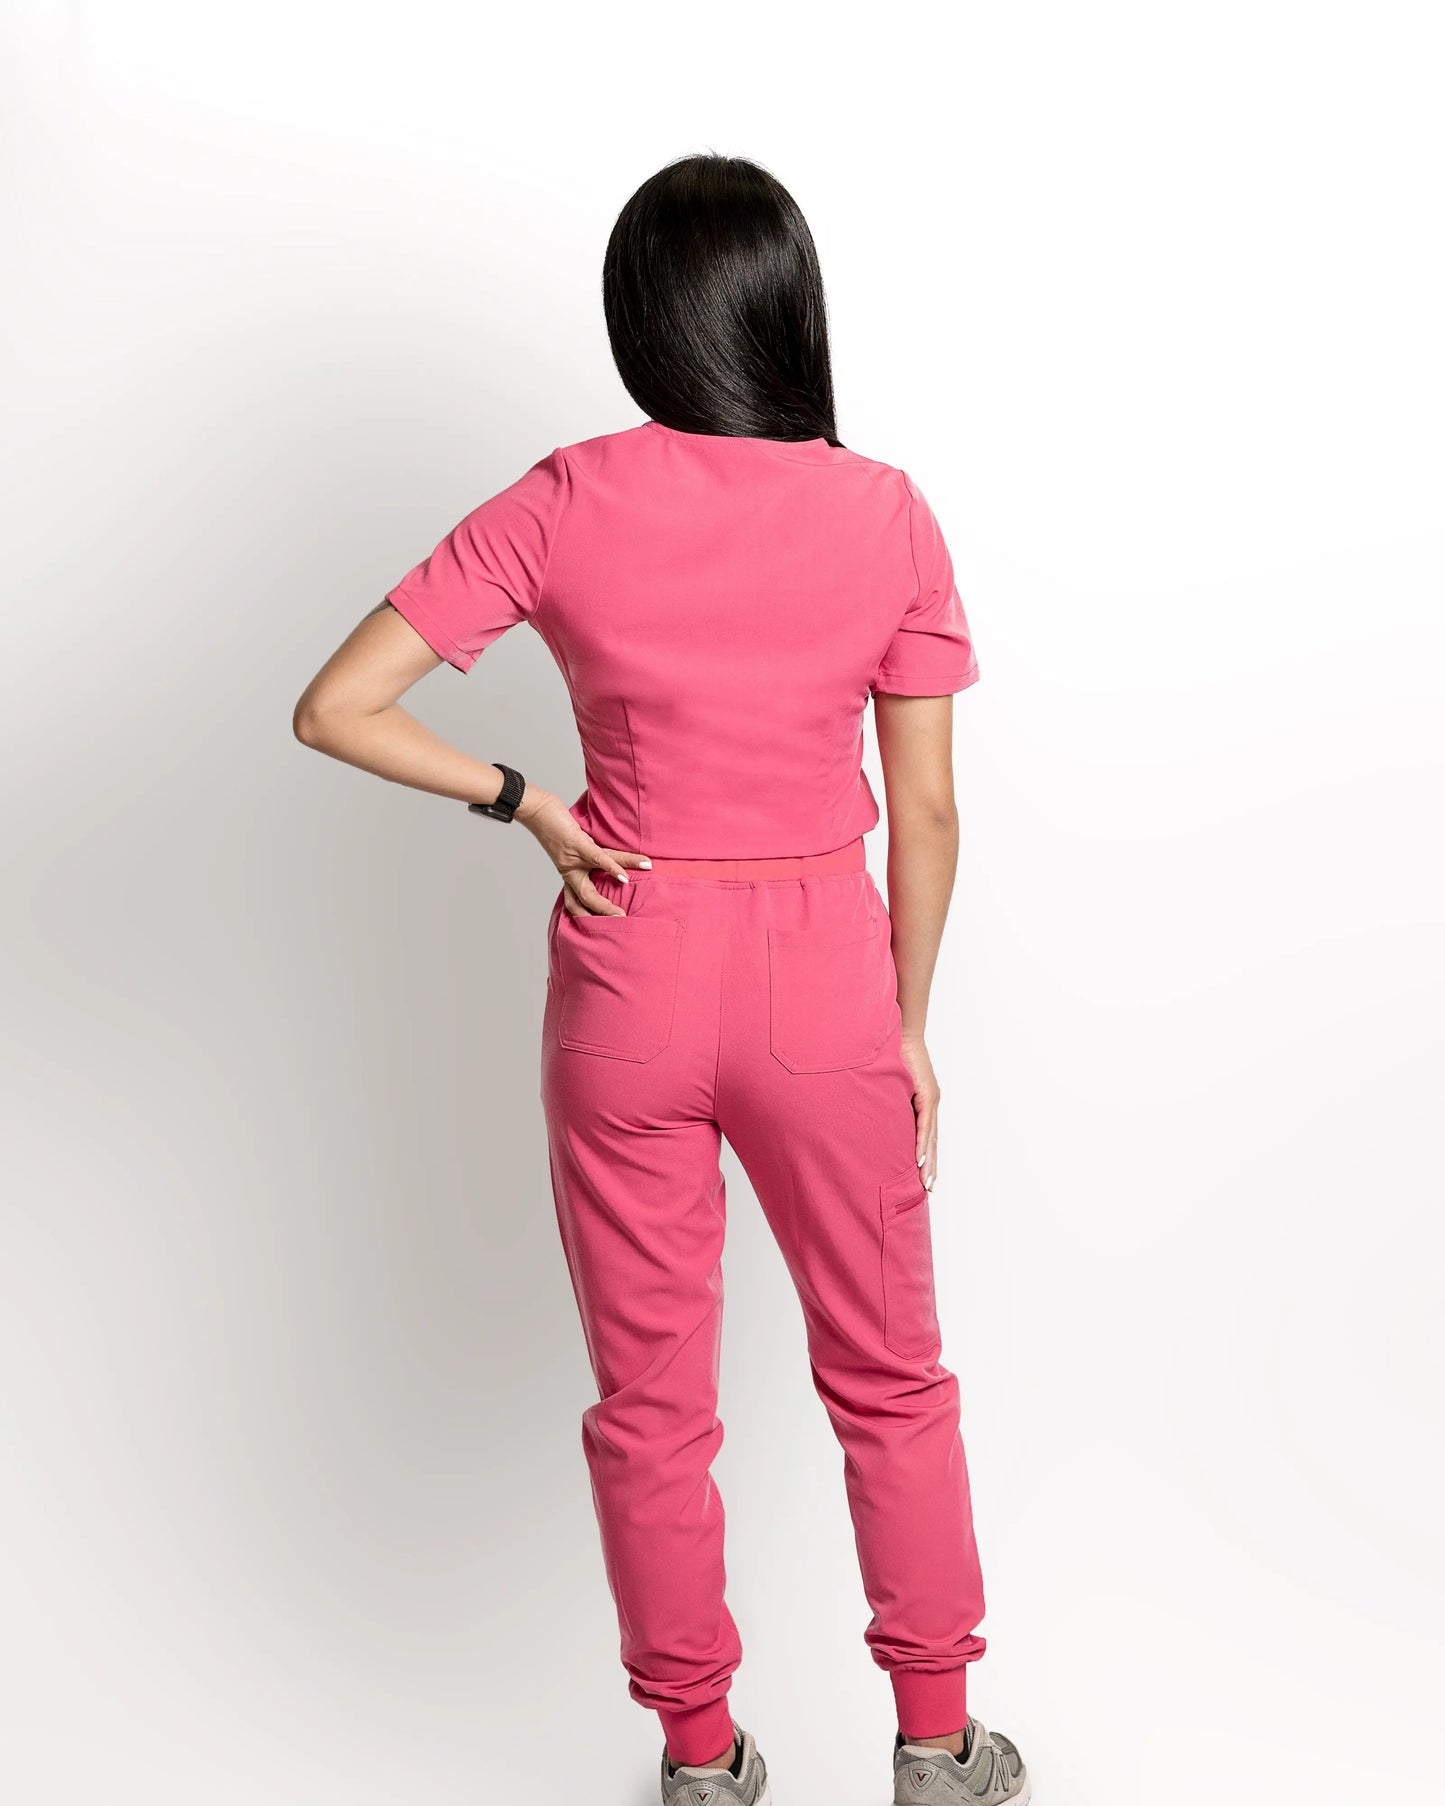 Women's One Pocket Slim Fit Petite Scrub Top - Pink Orchid Apparel & Accessories%shop name%%product variant%